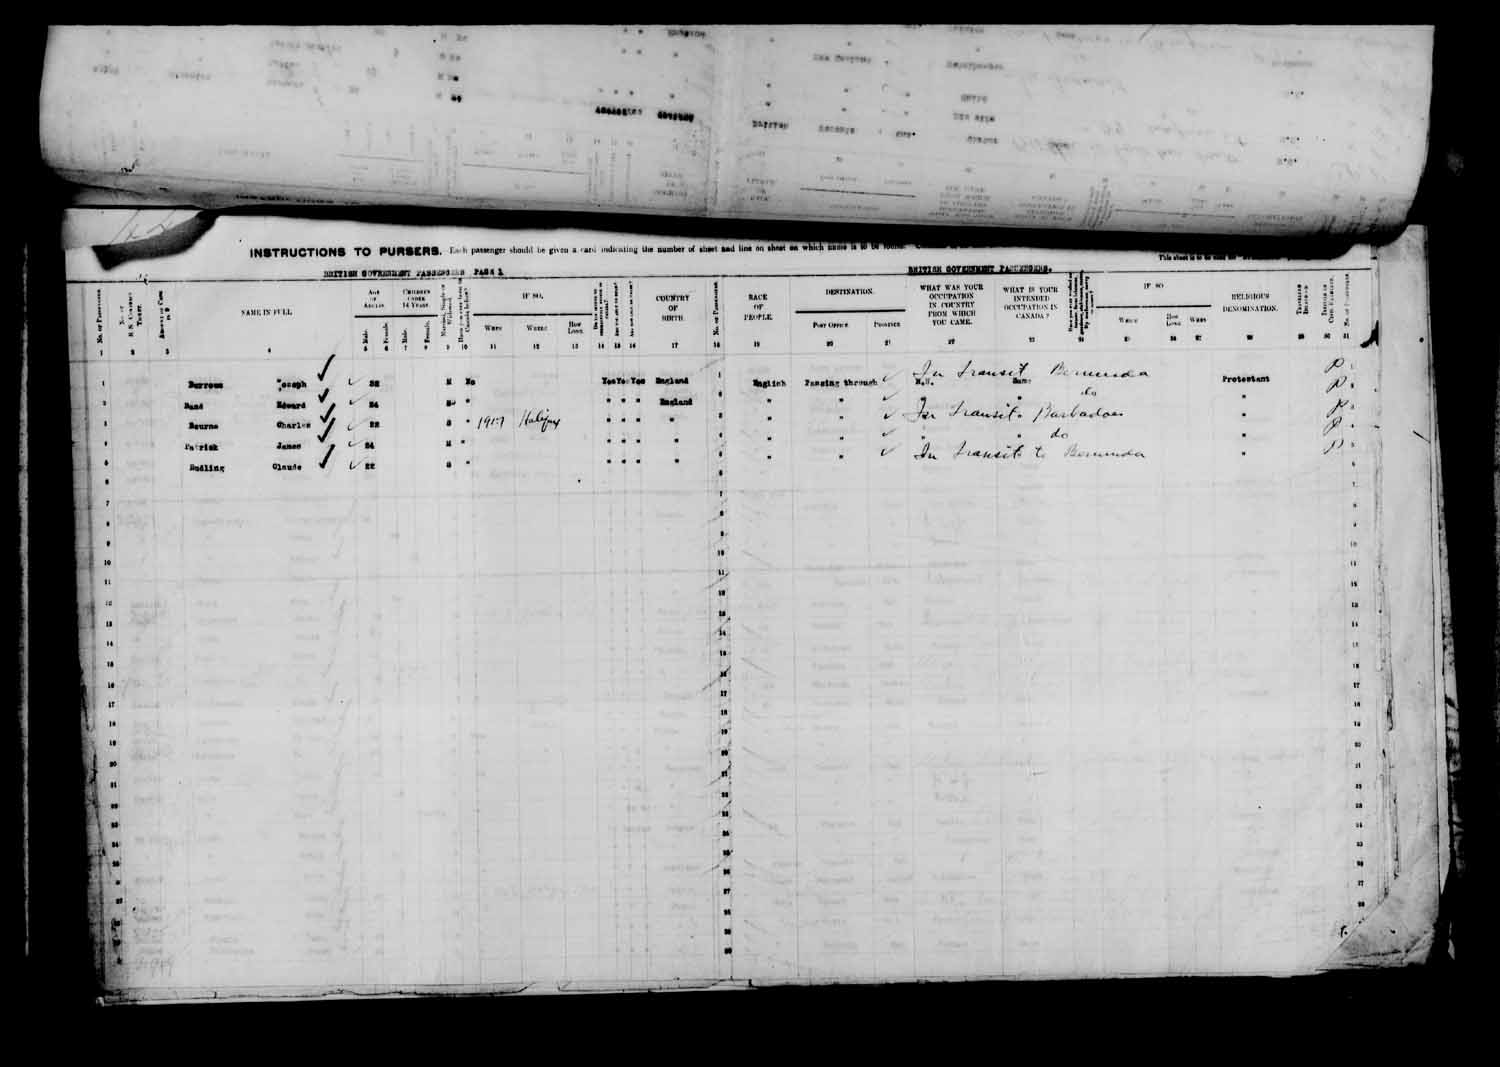 Digitized page of Passenger Lists for Image No.: e003610673